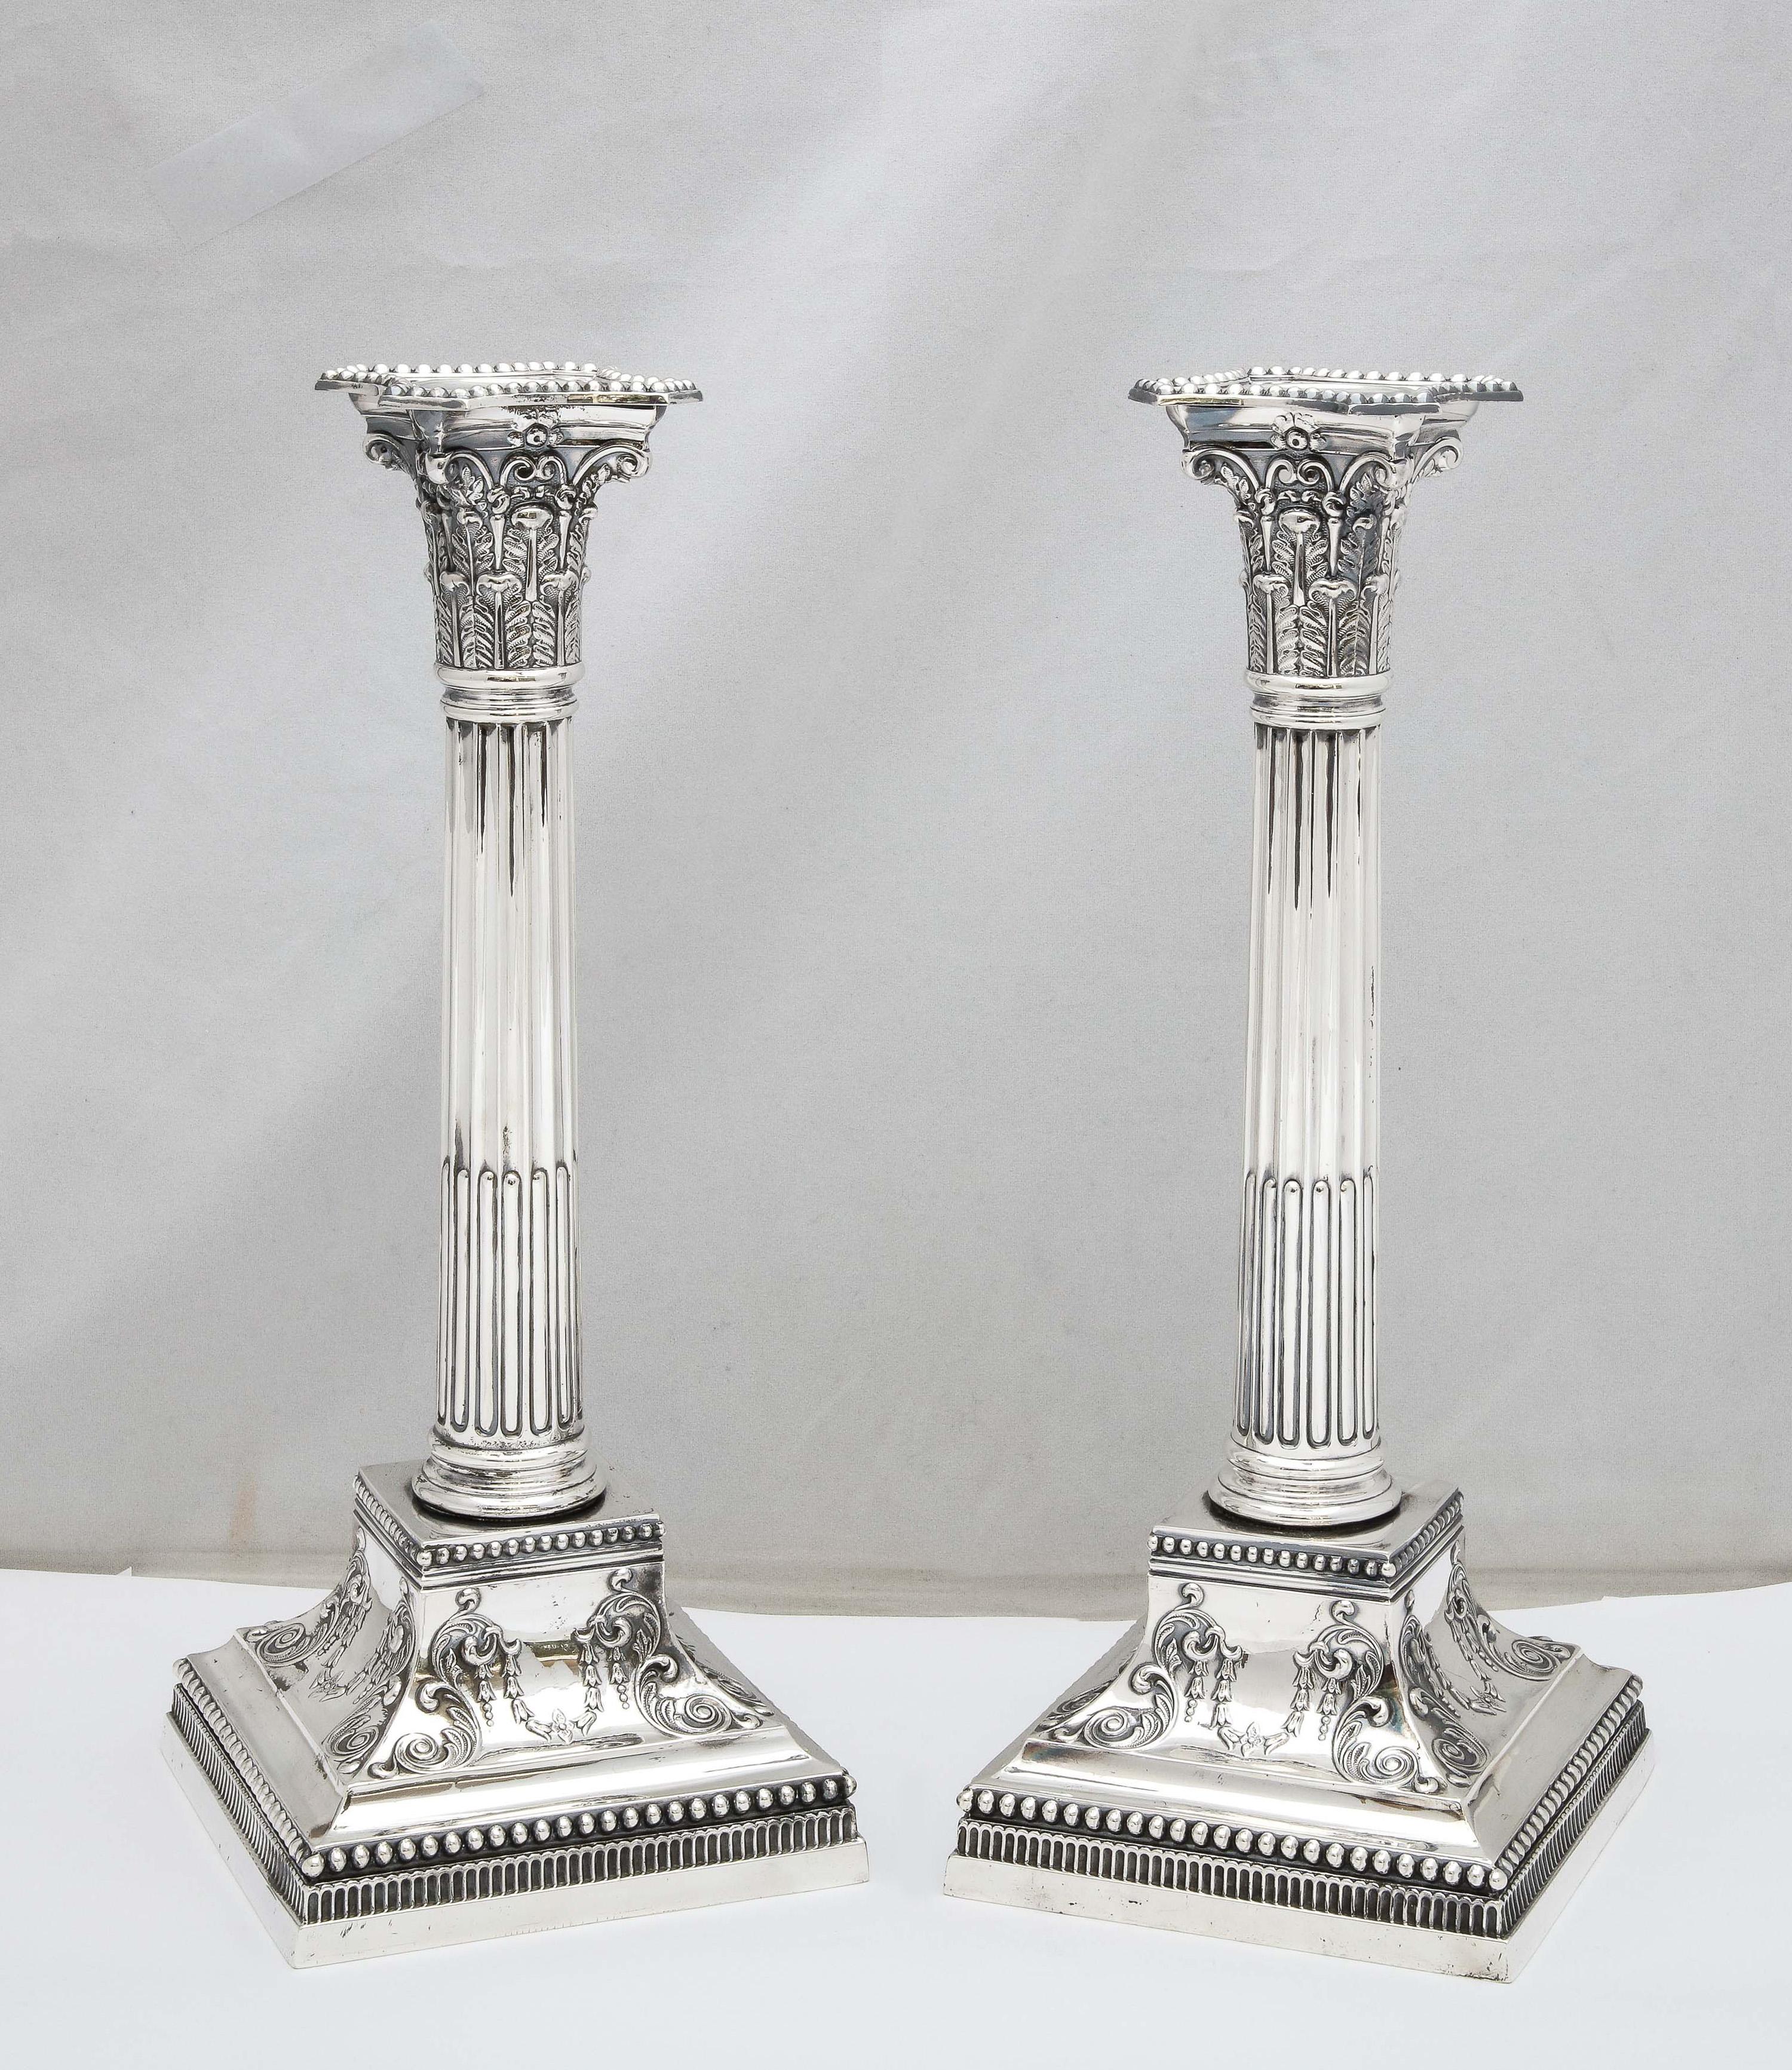 Pair of Edwardian Period, tall, Neoclassical-Style, sterling silver Corinthian column candlesticks, Sheffield, England, year-hallmarked for 1906, James Dixon and Sons - makers. Each candlestick measures 11 inches tall x 4 1/2 wide (at widest point